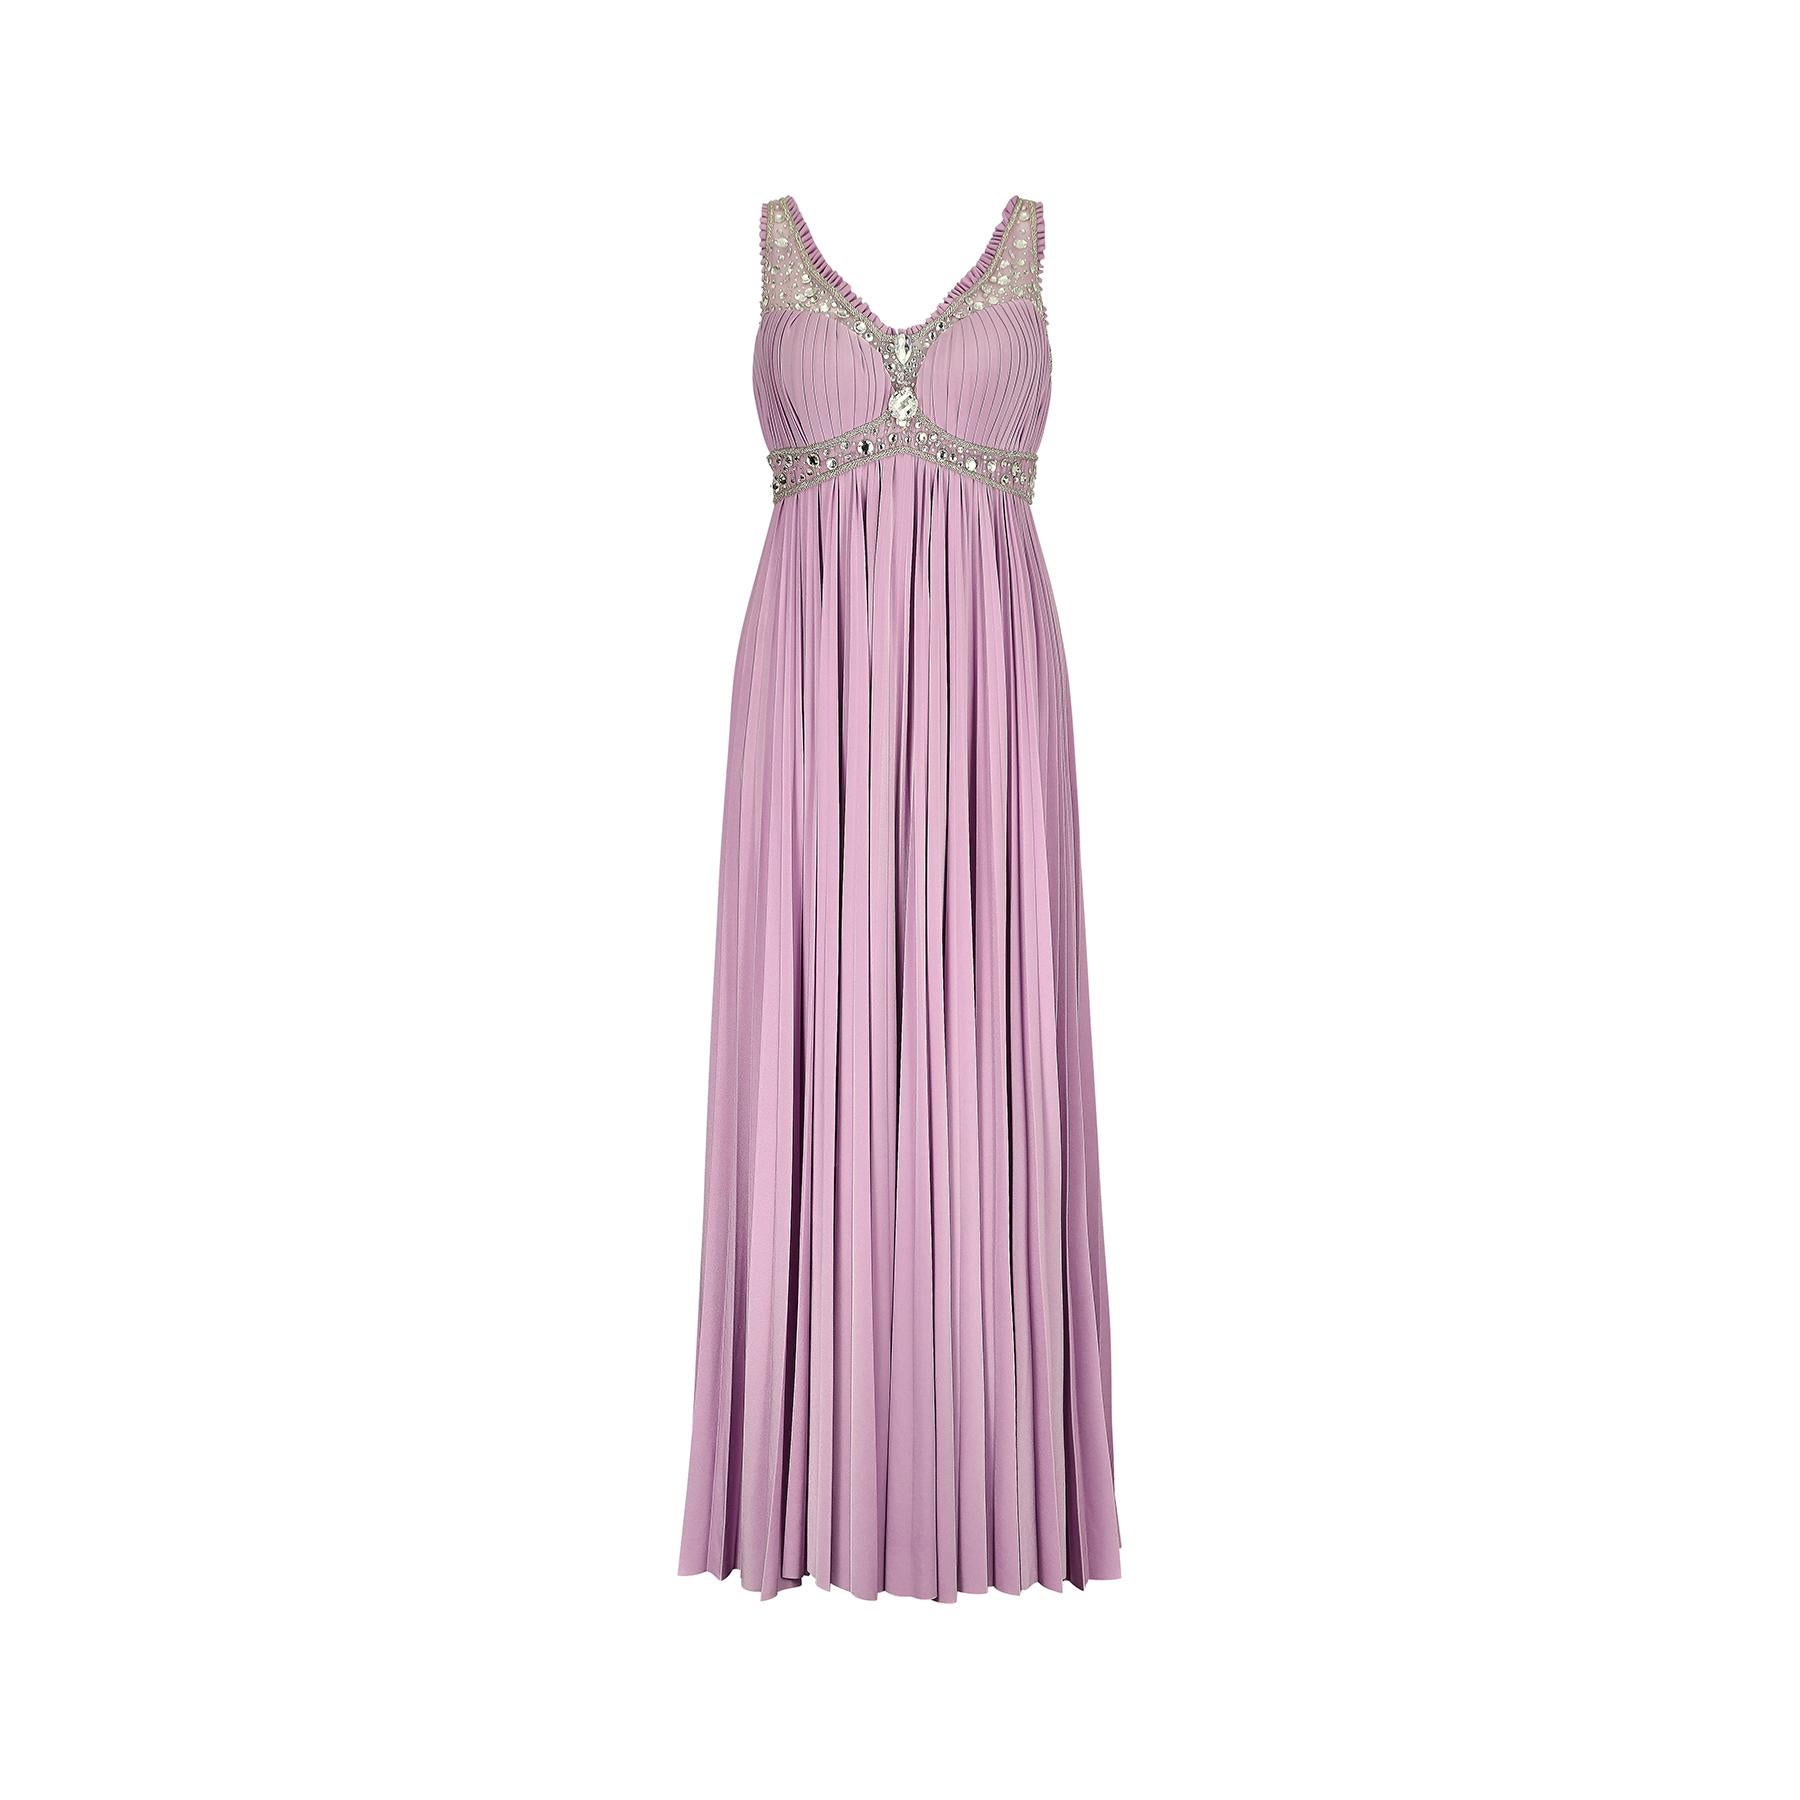 Women's or Men's 1990s Bespoke Lilac Crystal-Embellished Gown For Sale